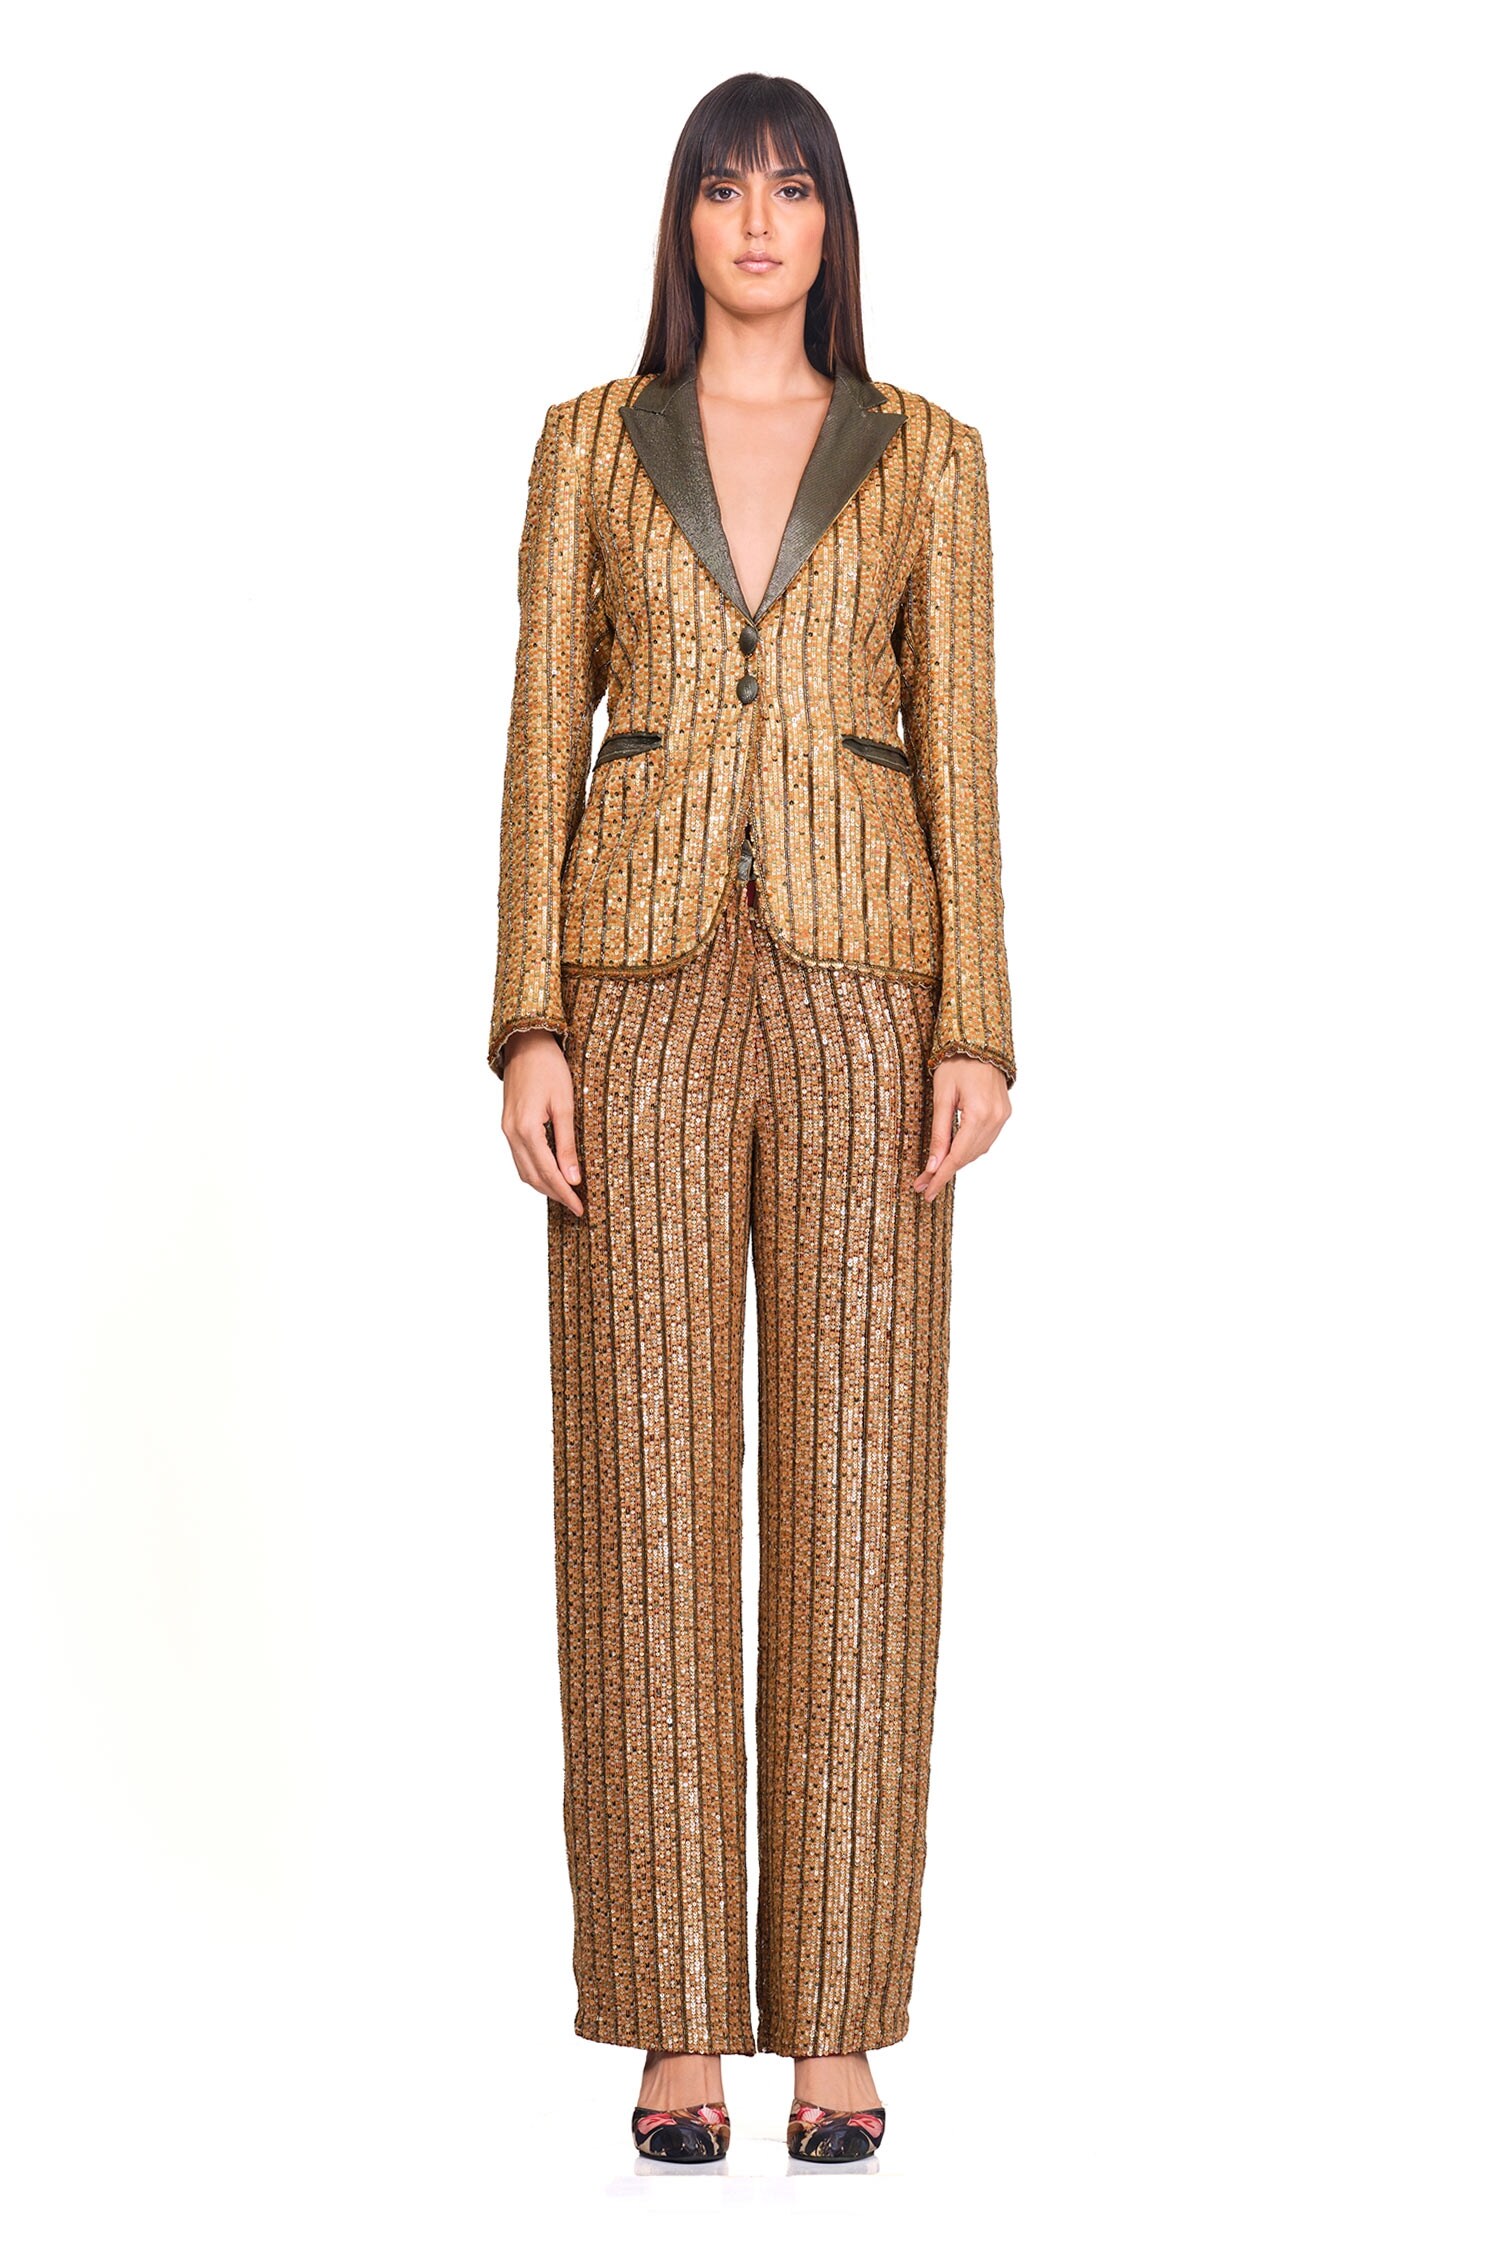 Rocky Star Gold Satin Sequin Embroidered Blazer And Pant Set